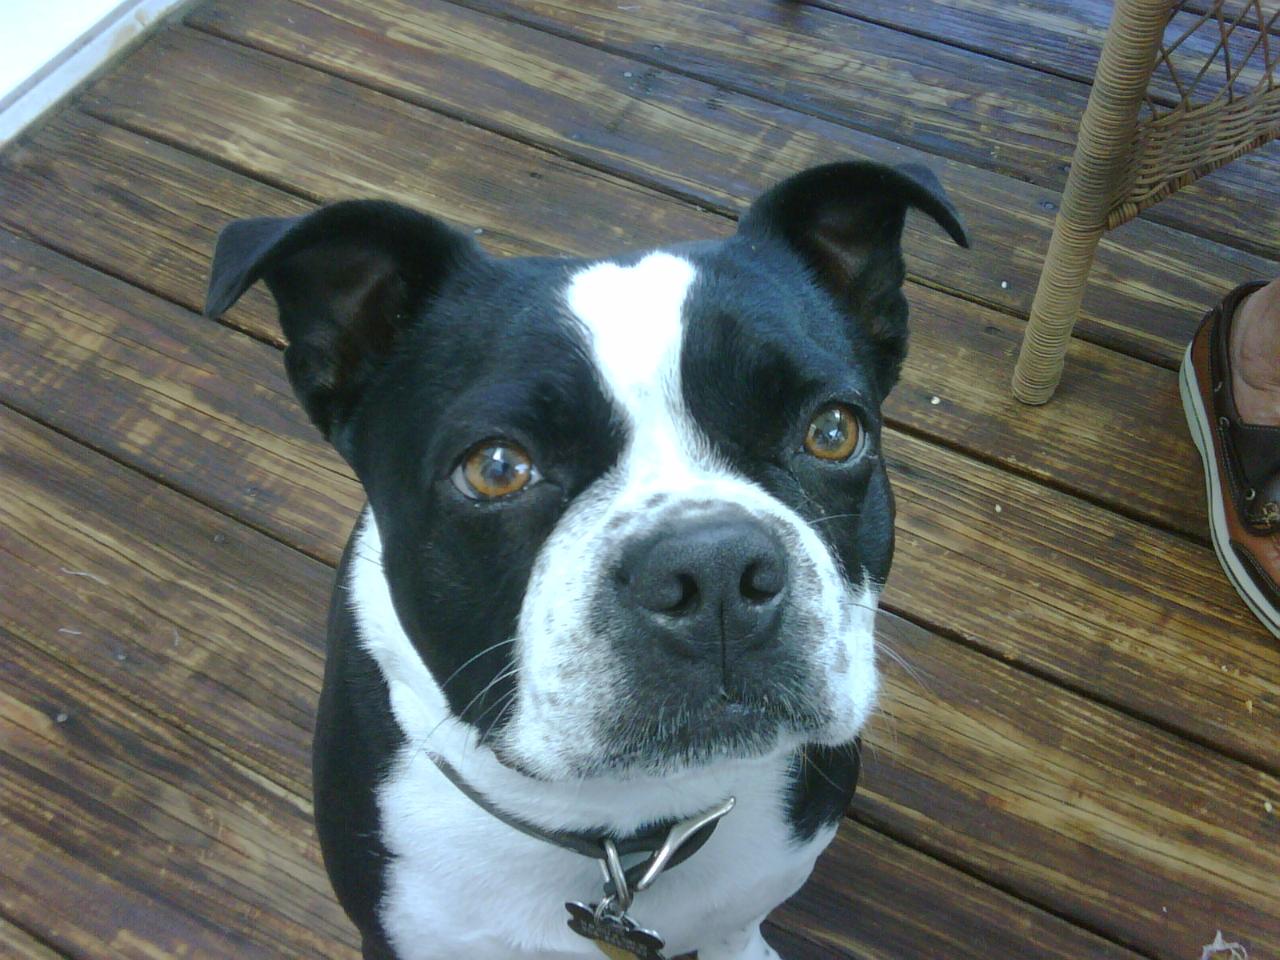 Dino The Boston Bull Dog (user submitted)